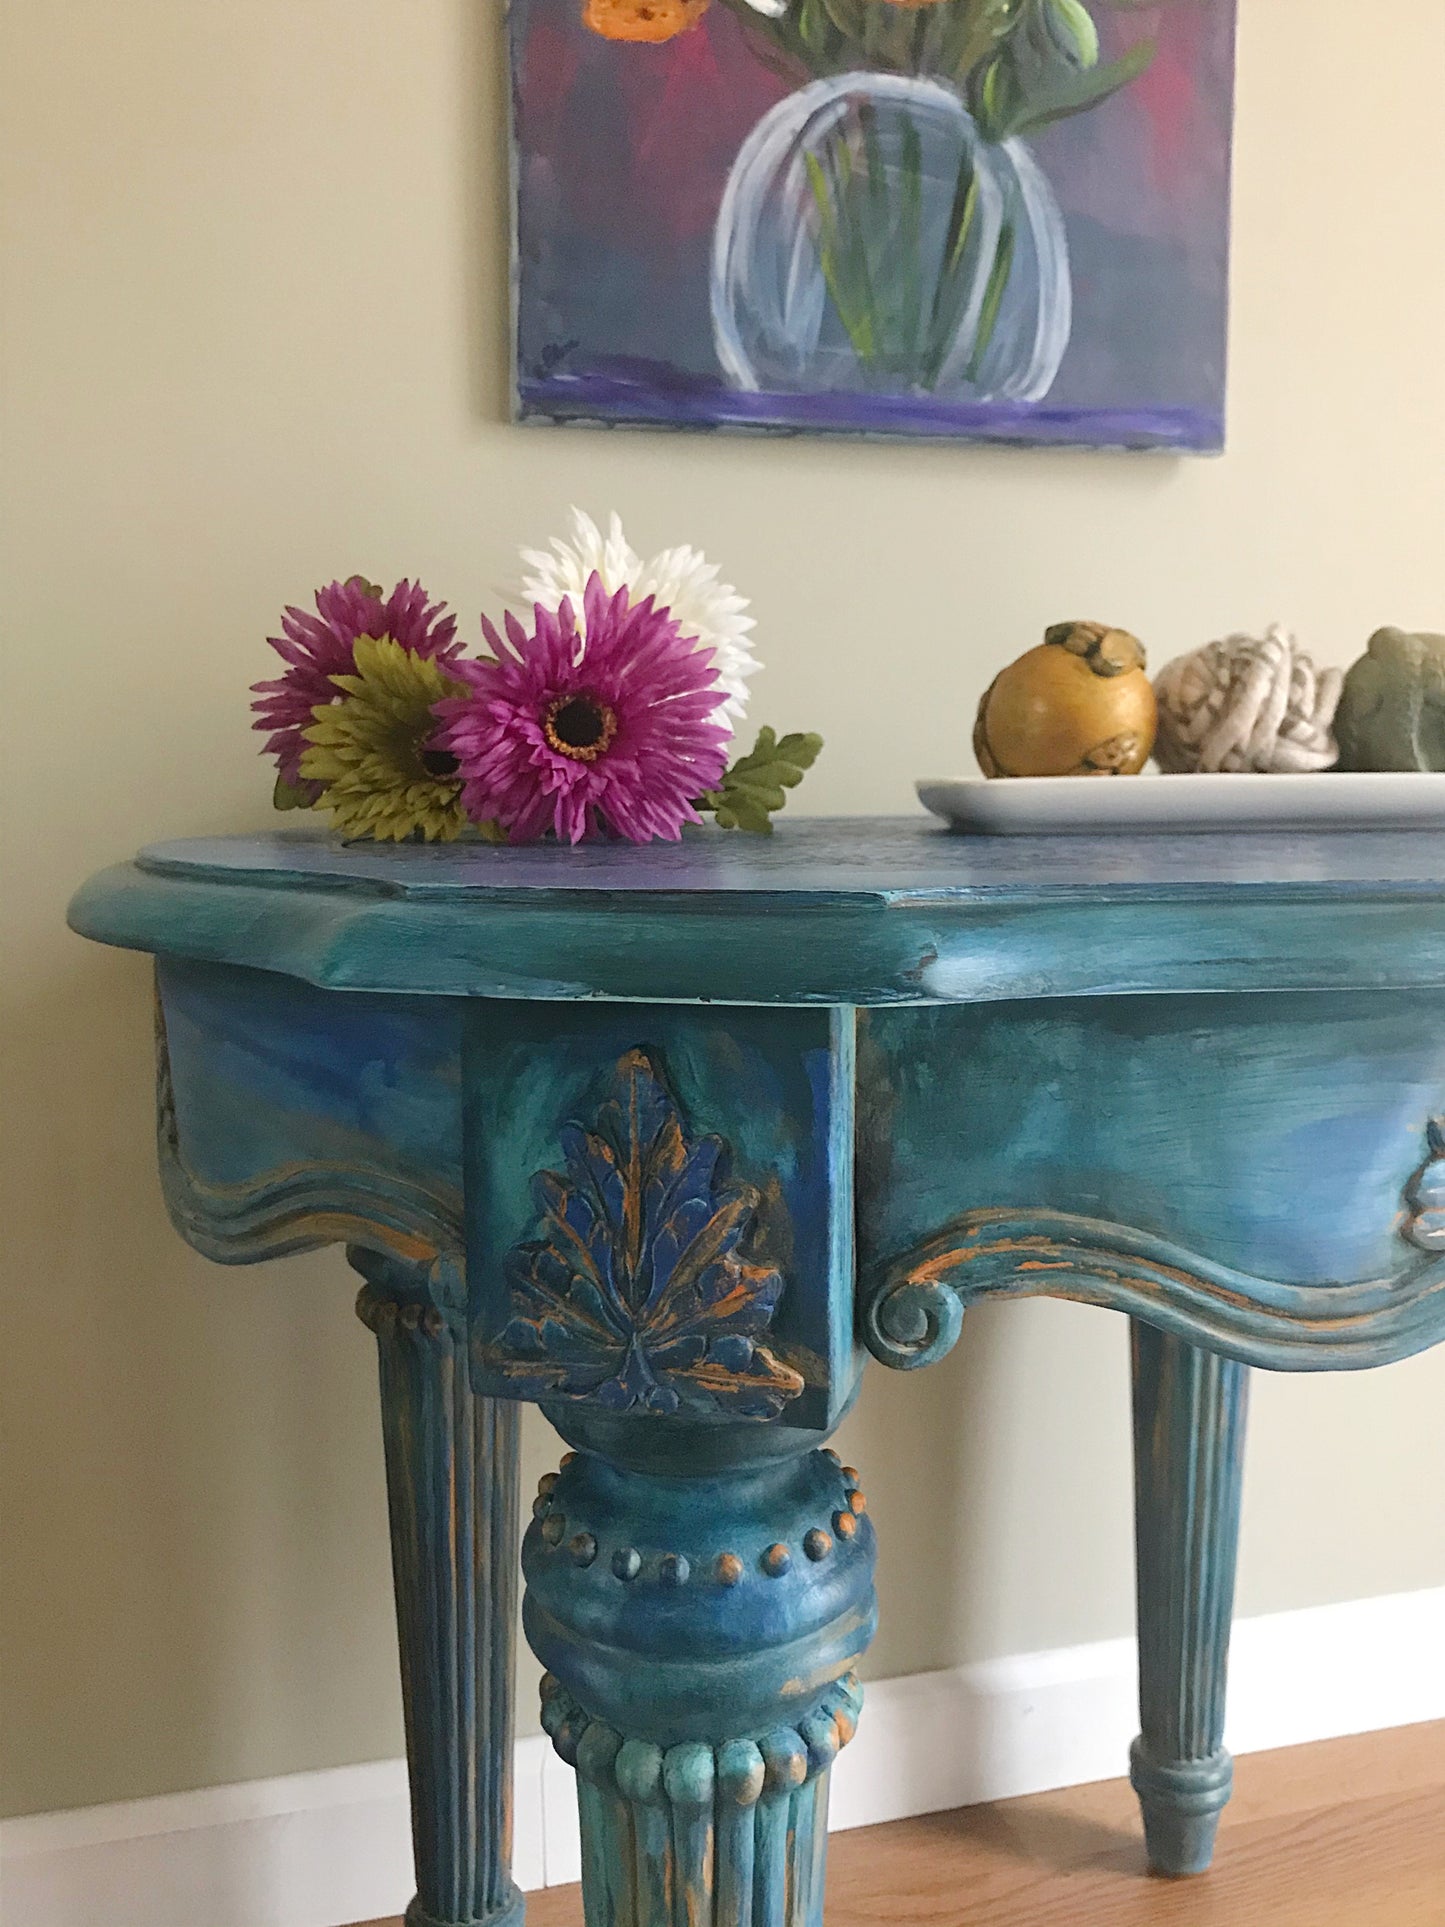 Hand Painted Blue Rustic Side/End Table -Bohemian - Whimsical - Blue